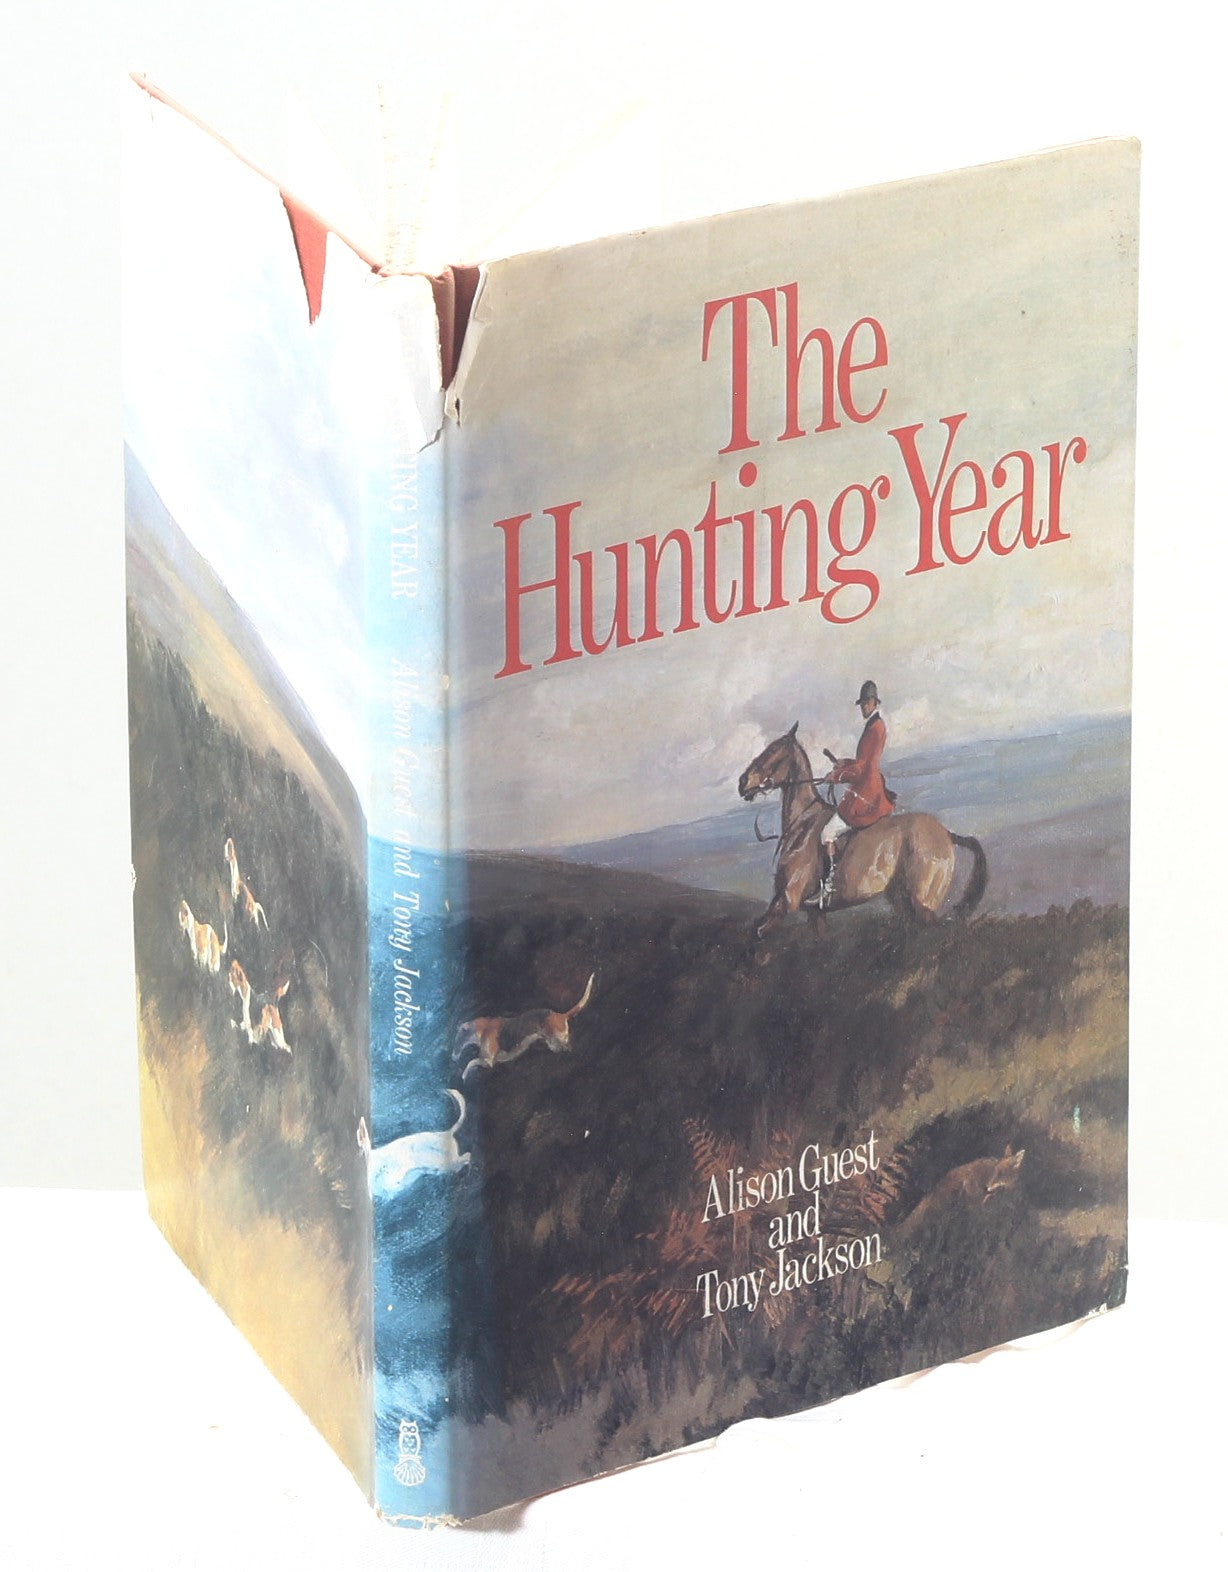 The Hunting Year by Alison Guest & Tony Jackson, 1978